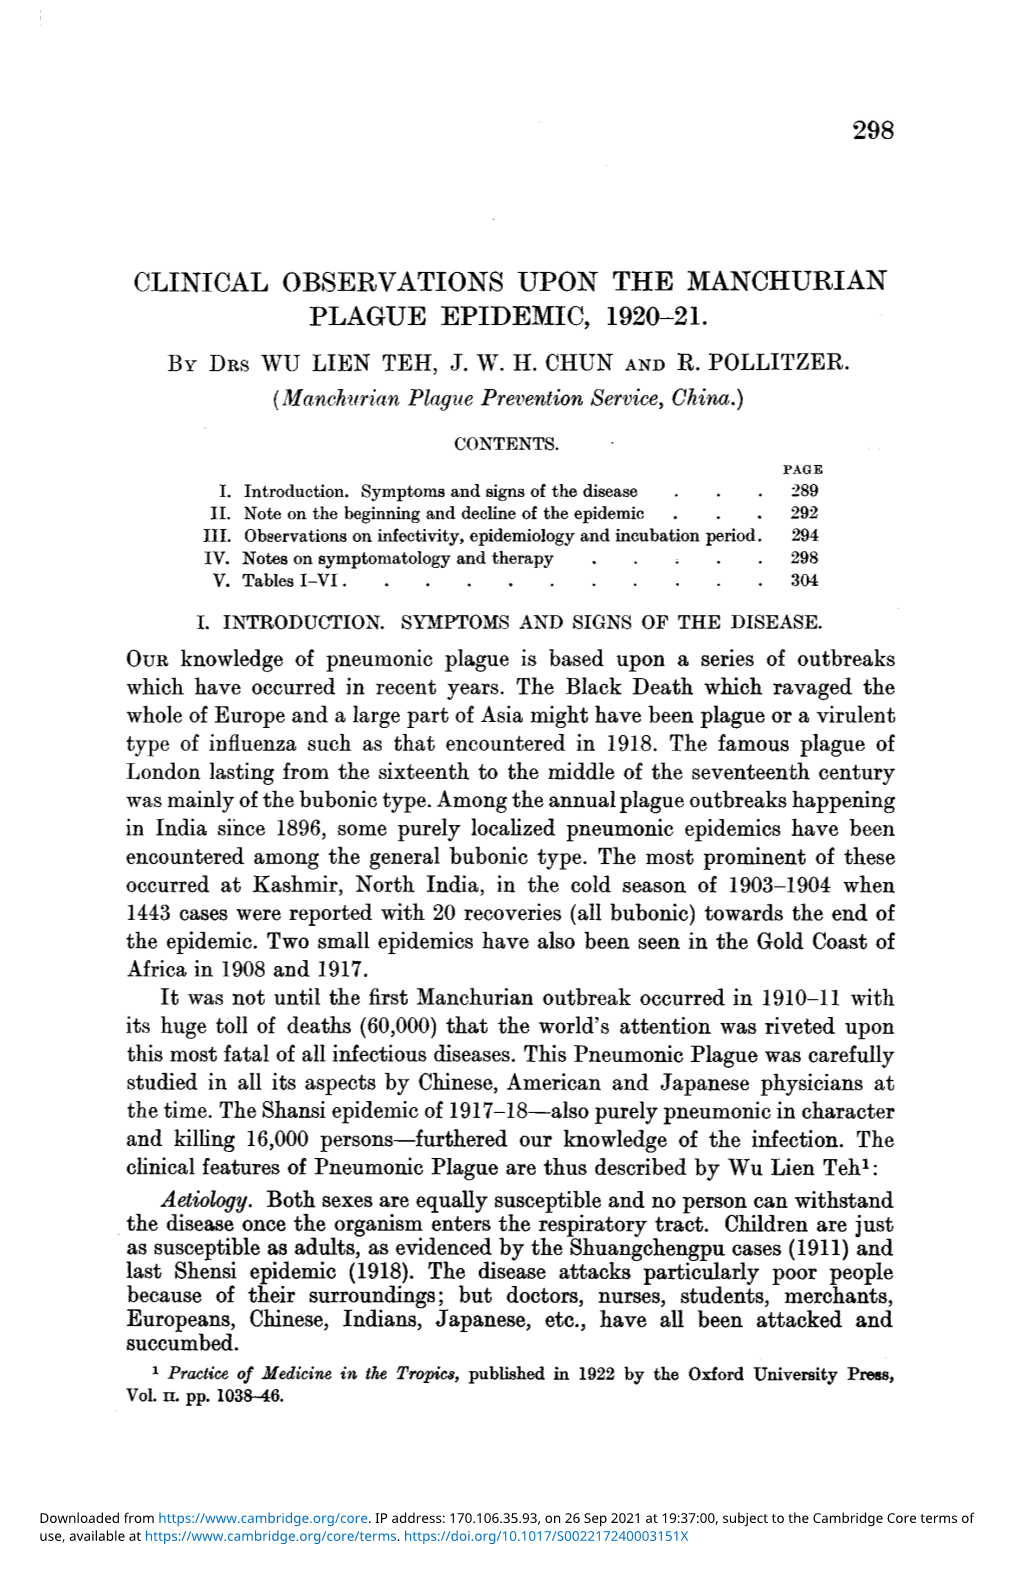 298 Clinical Observations Upon the Manchurian Plague Epidemic, 1920